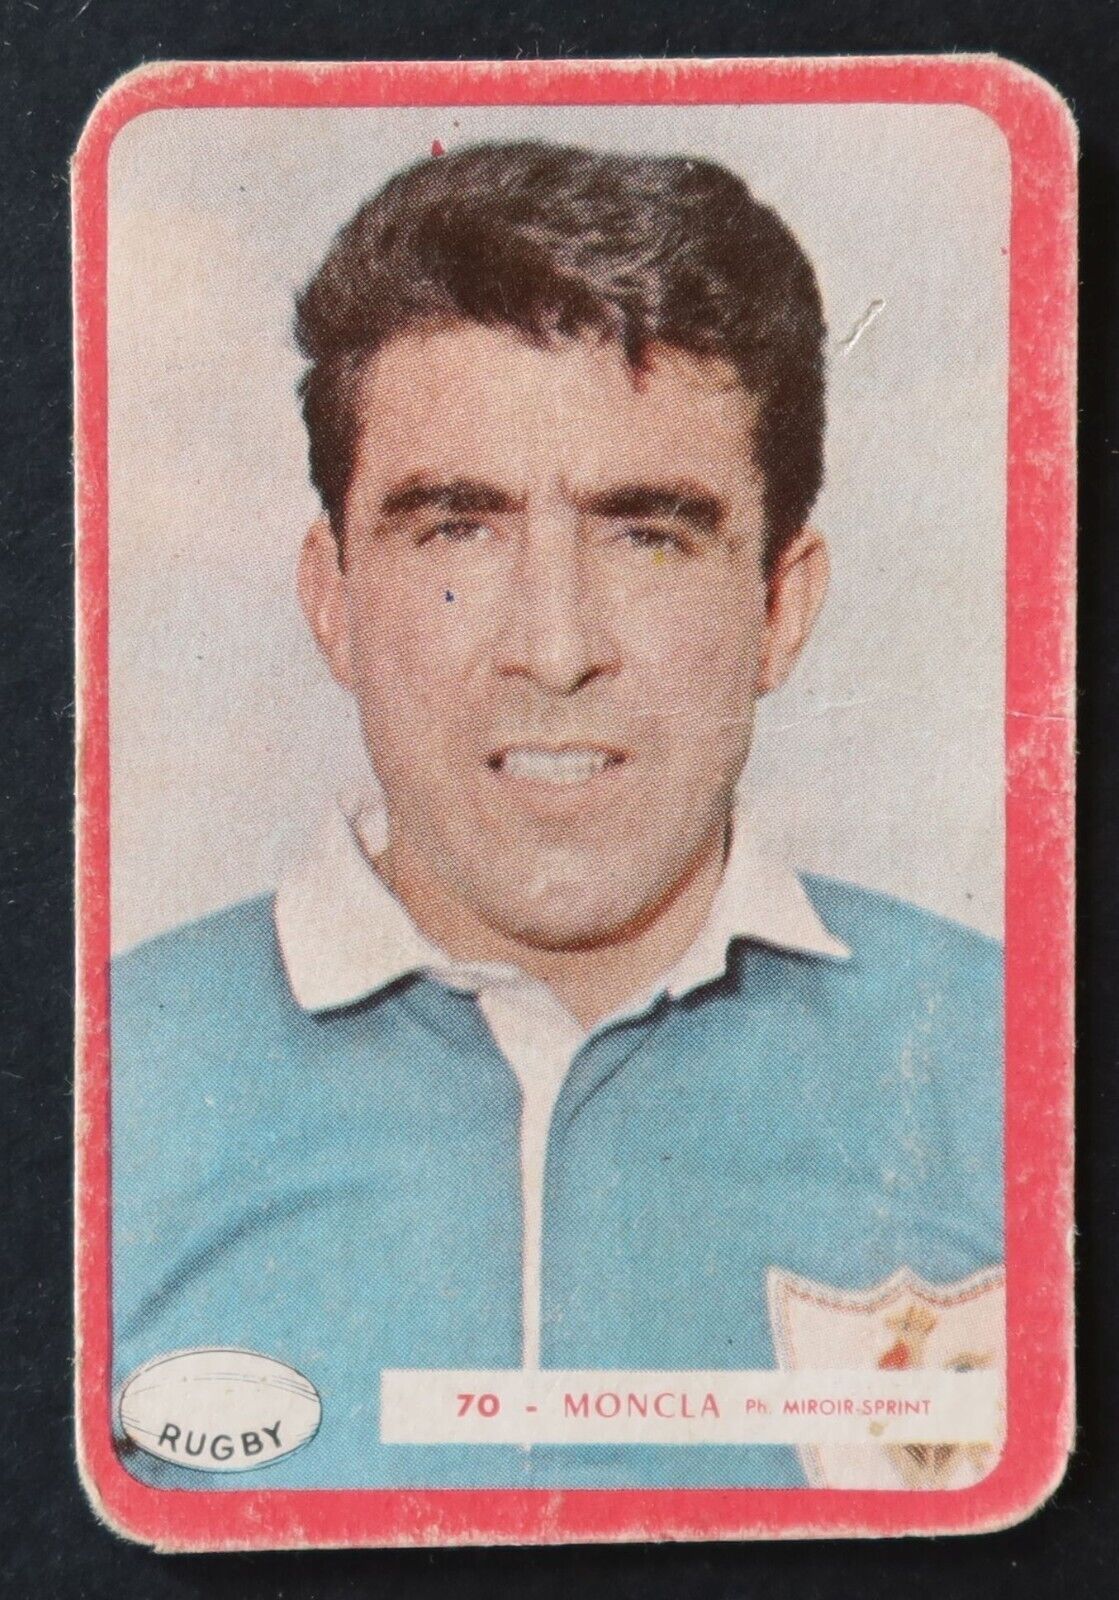 #70 MONCLA RUGBY 1960 Card No Panini Sprint Mirror Image